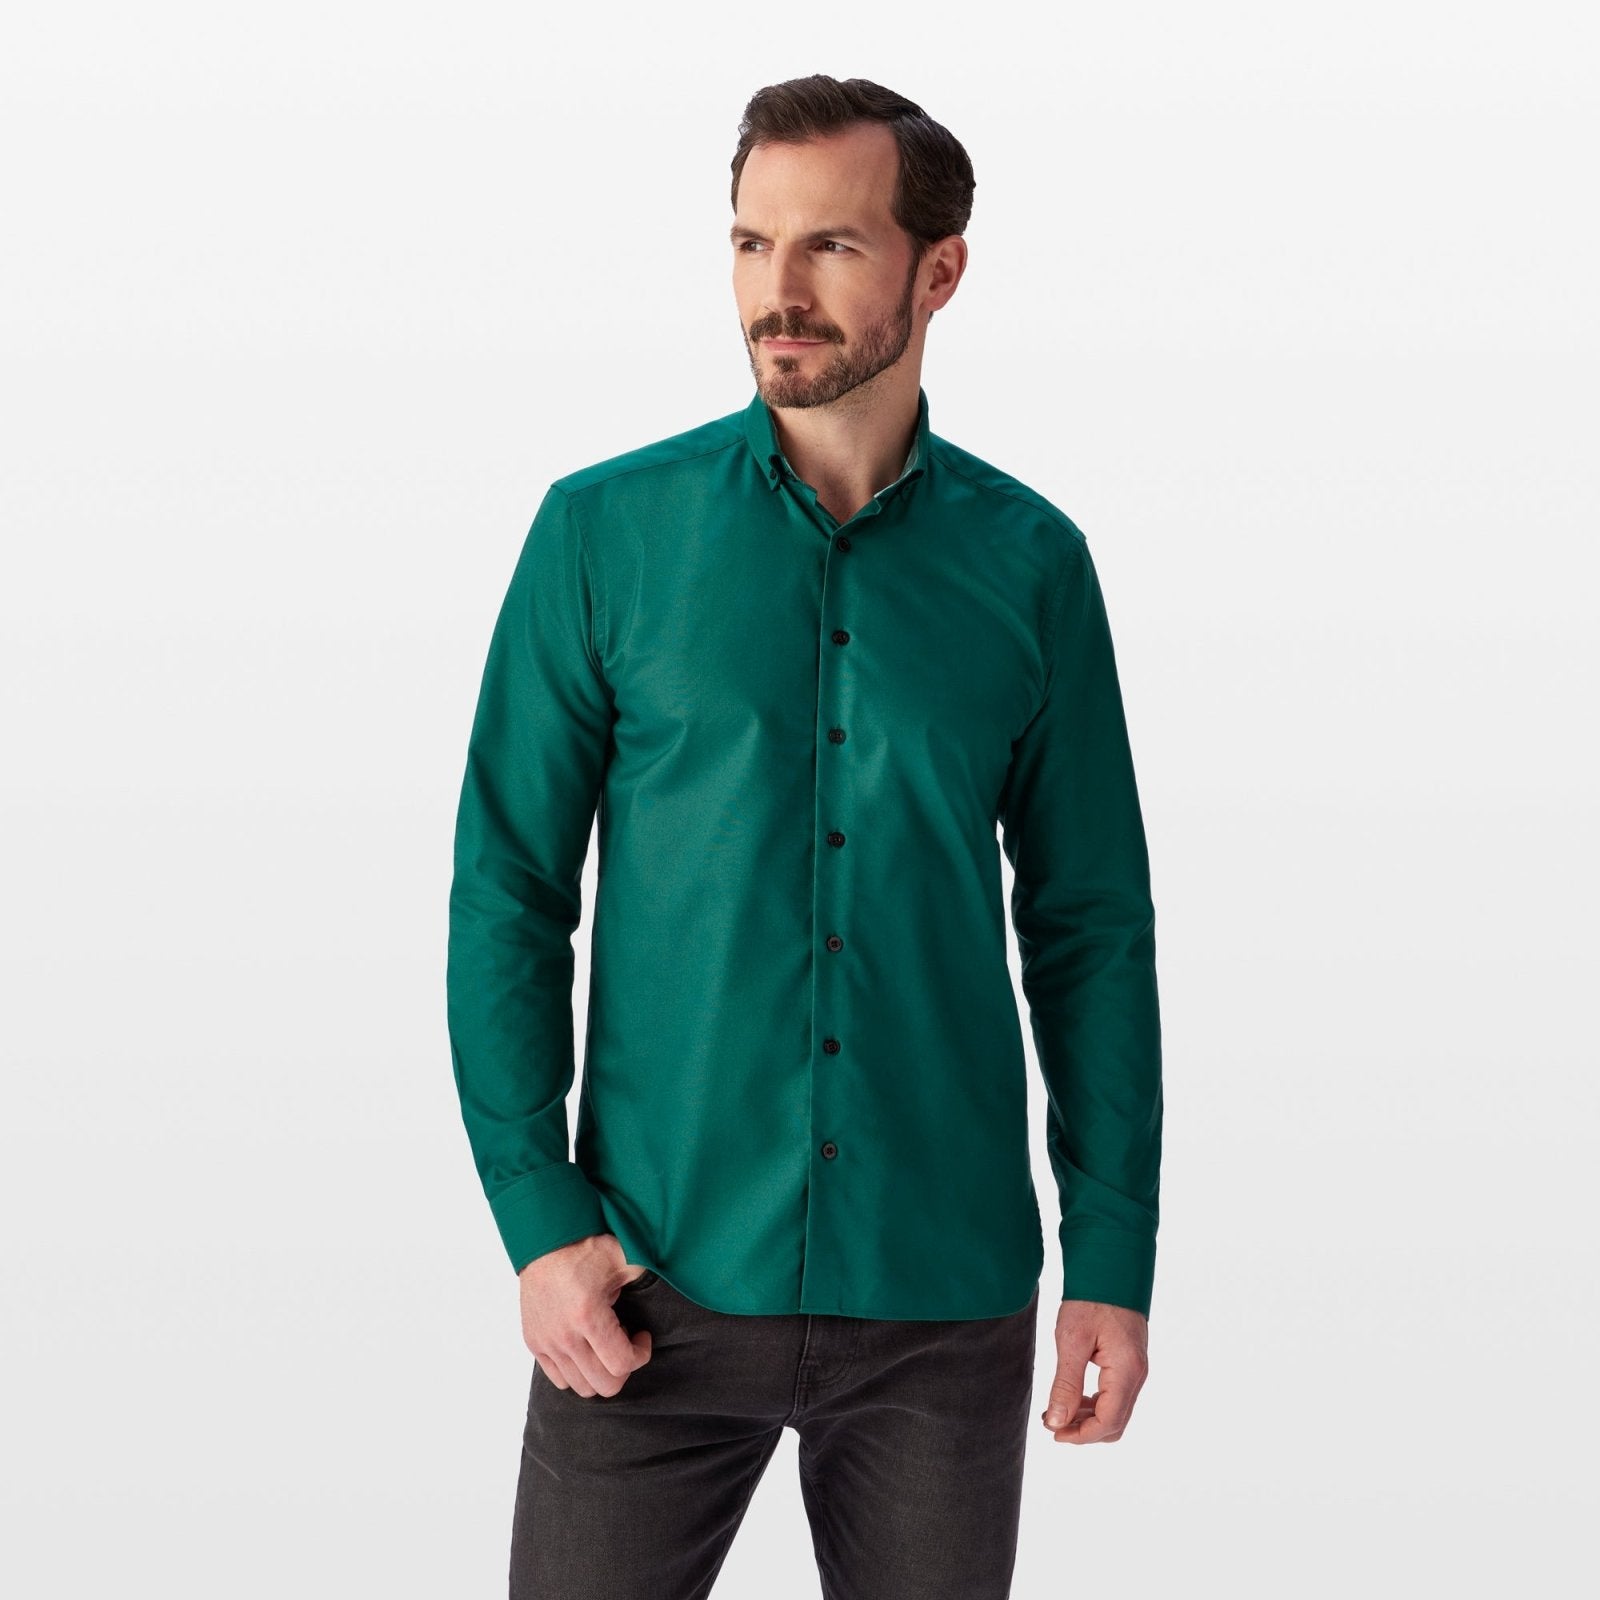 Green Oxford with China Town Accents Button - Down Shirt - Blake Mill